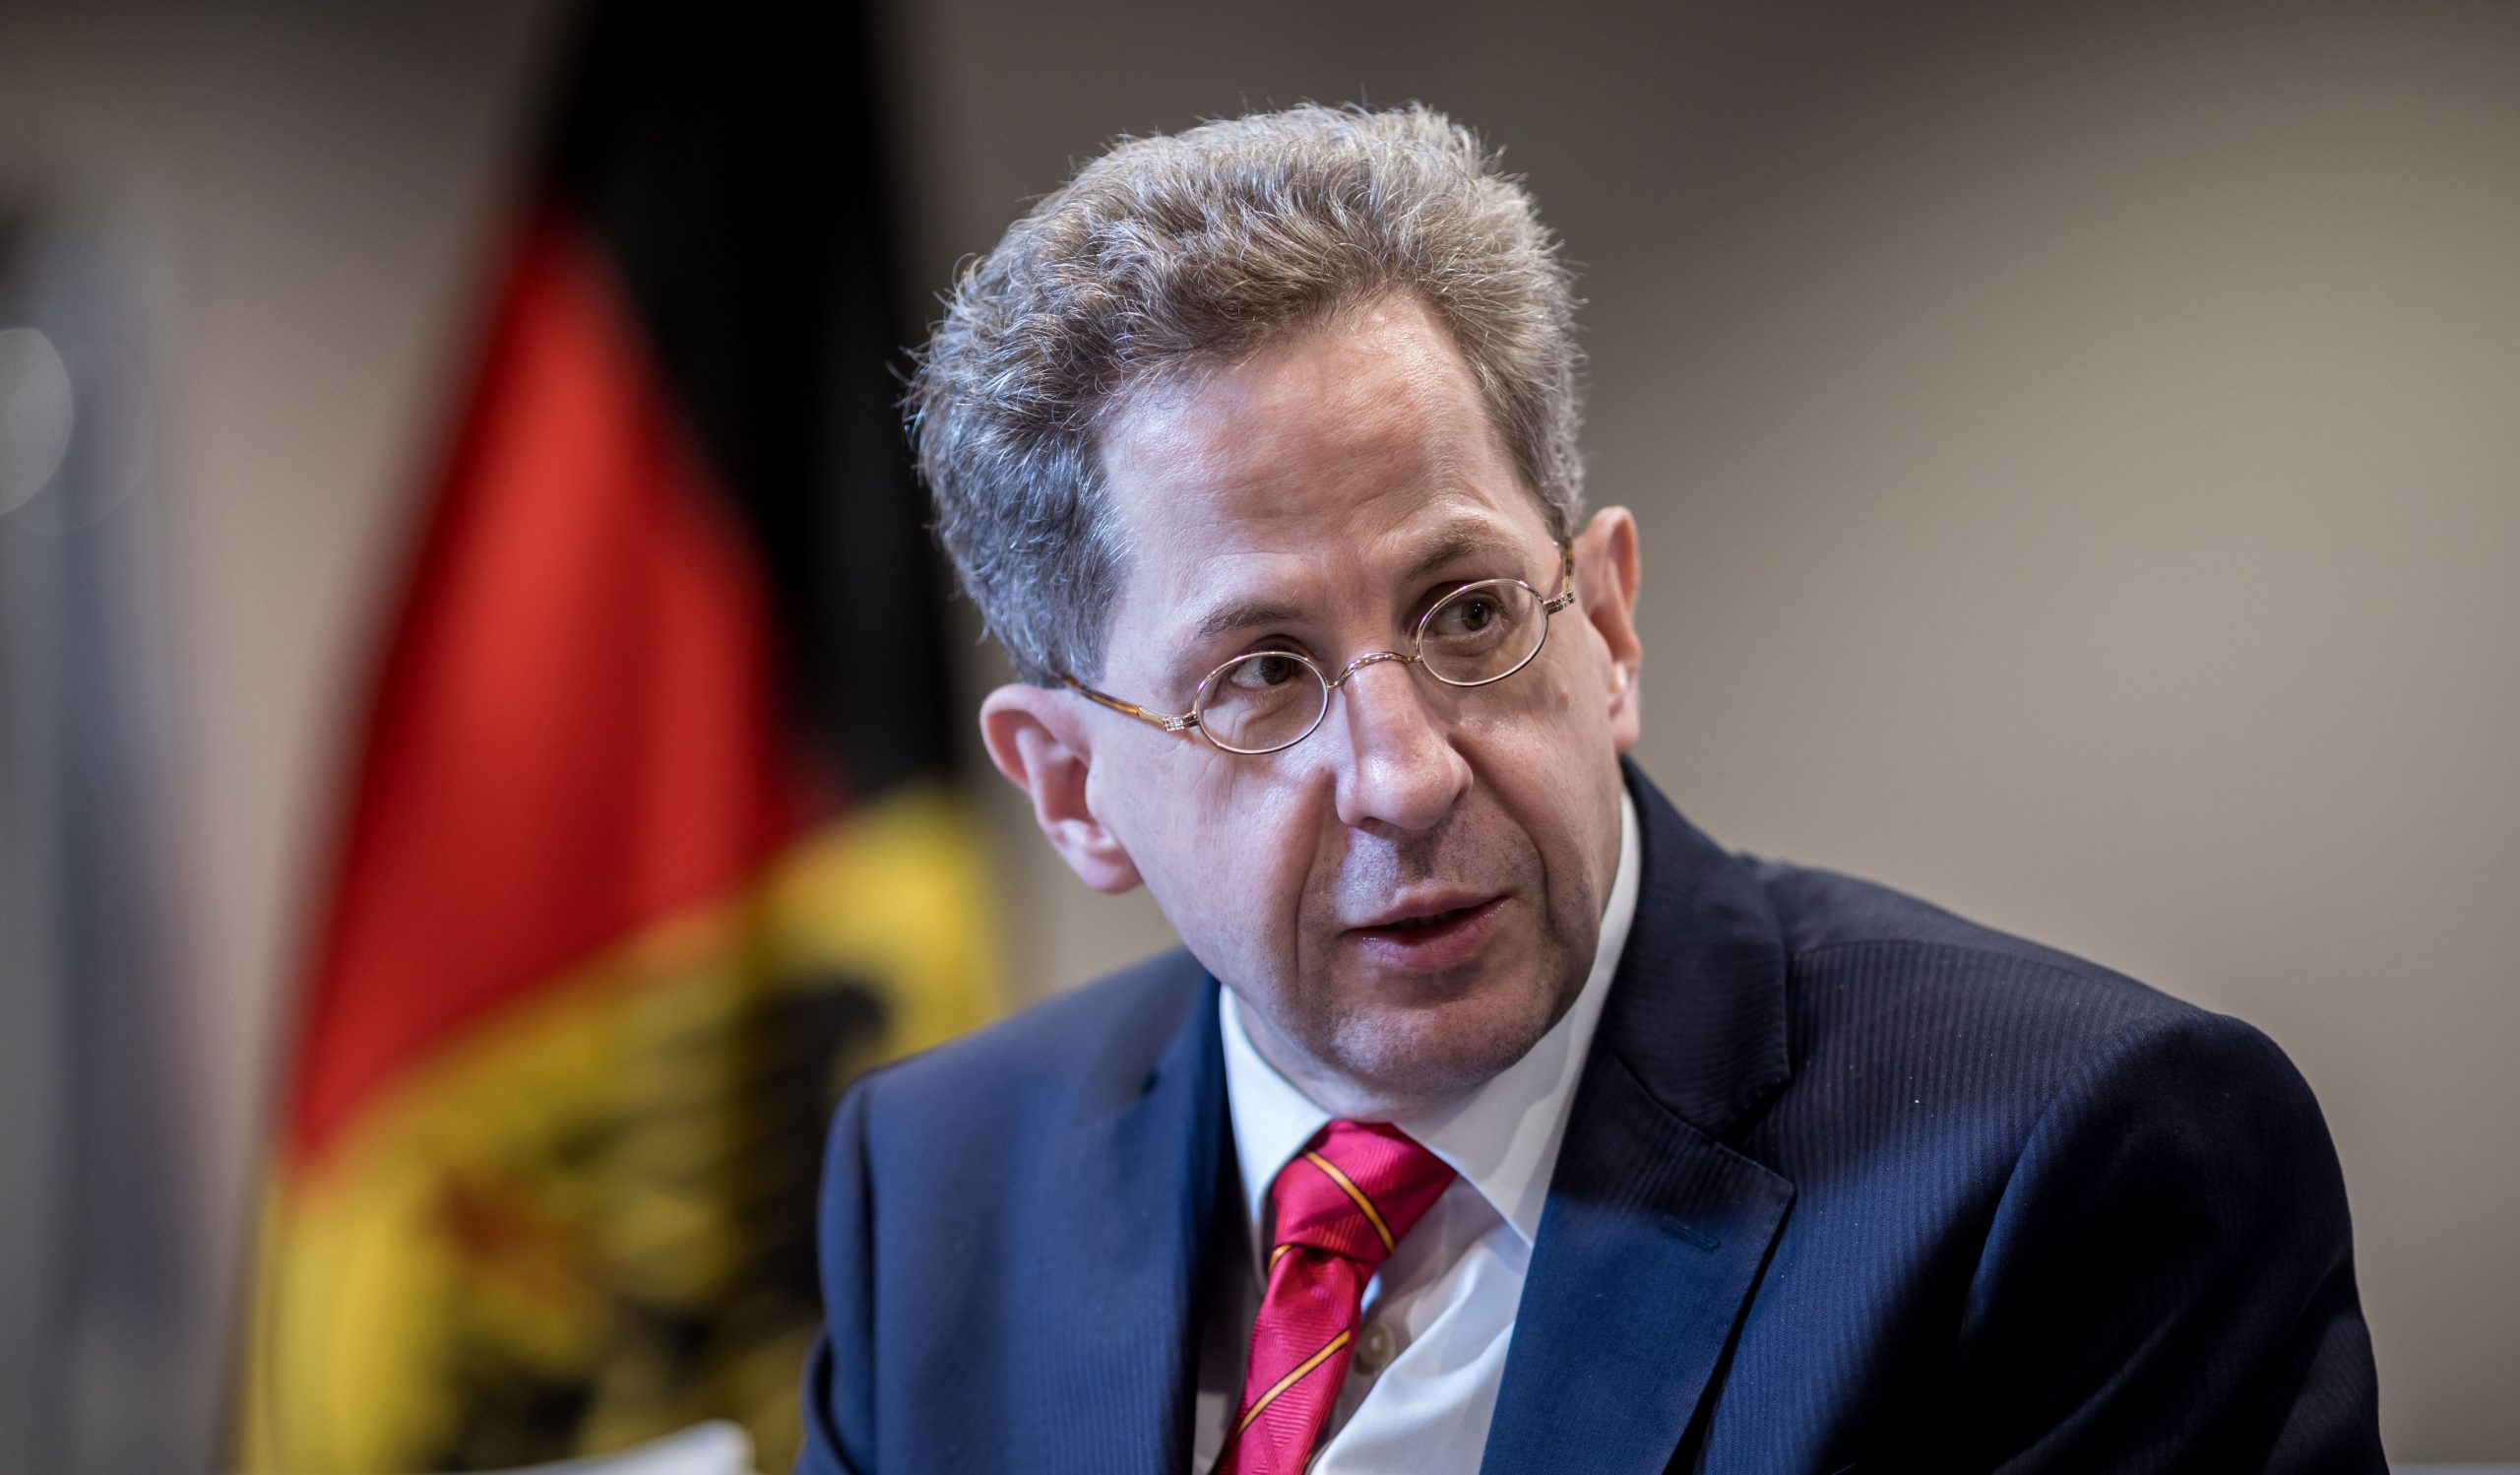 German domestic spy agency criticizes former head for alleged extremism